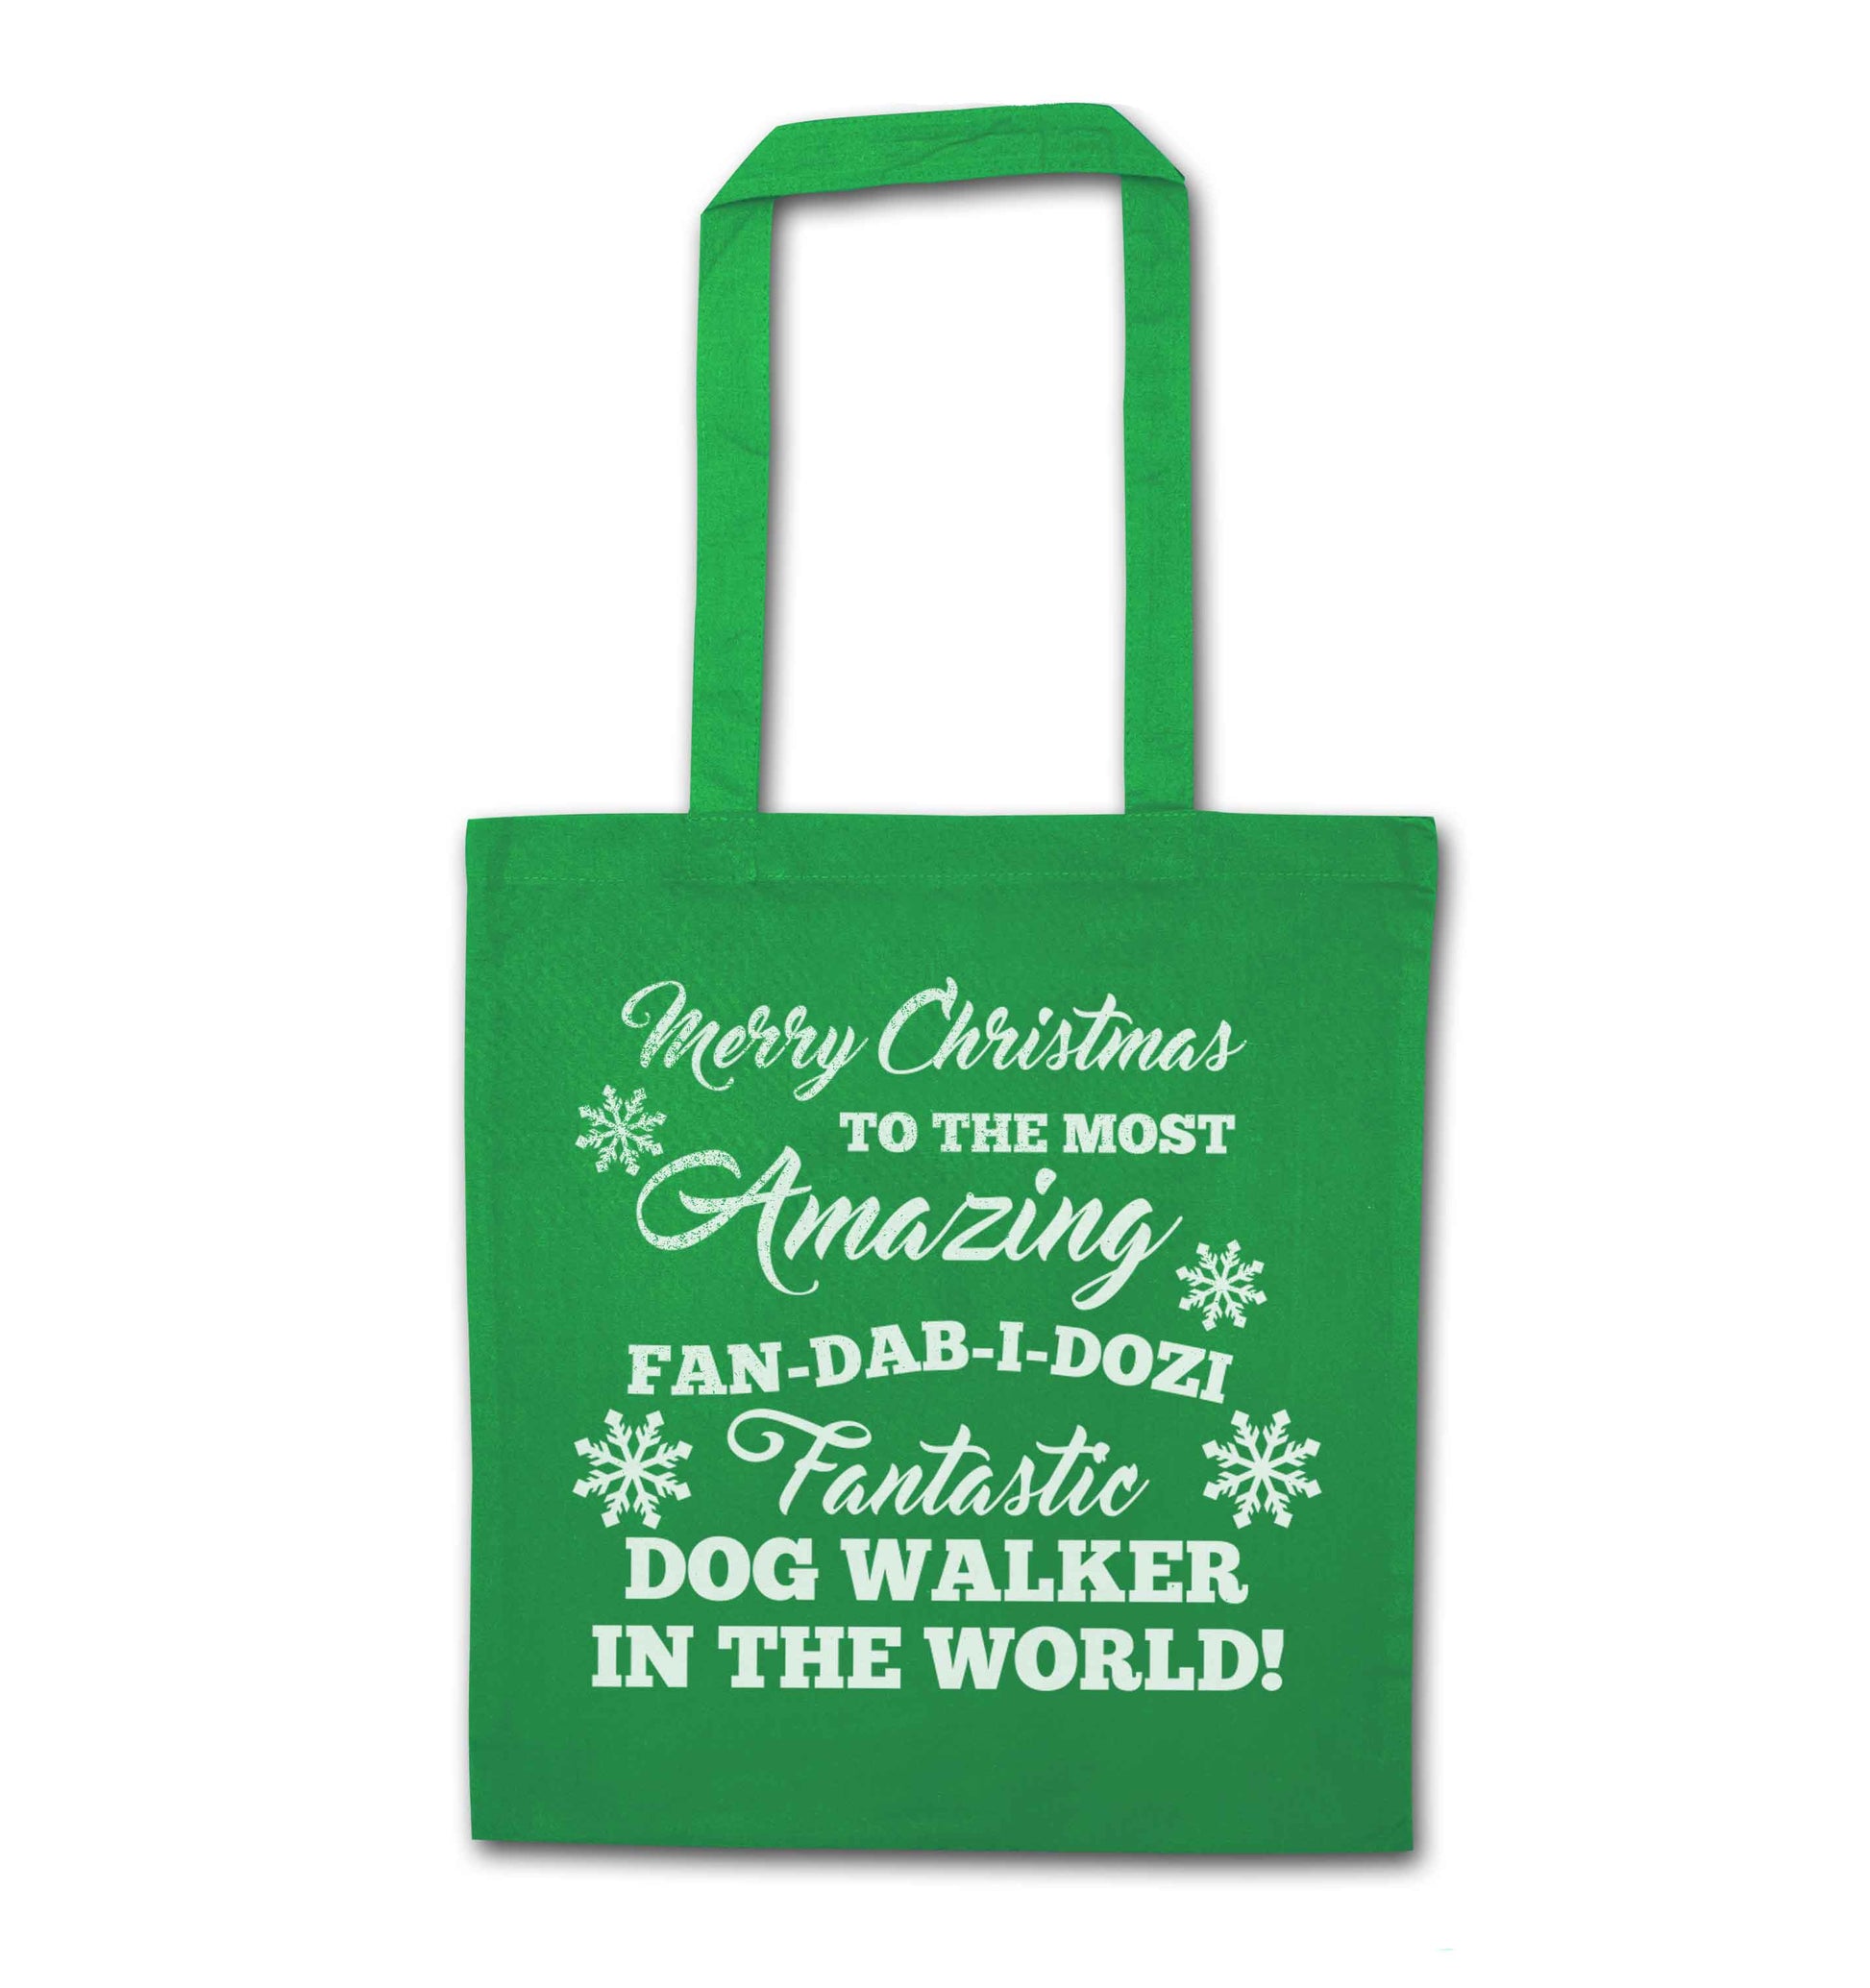 Merry Christmas to the most amazing fan-dab-i-dozi fantasic dog walker in the world green tote bag